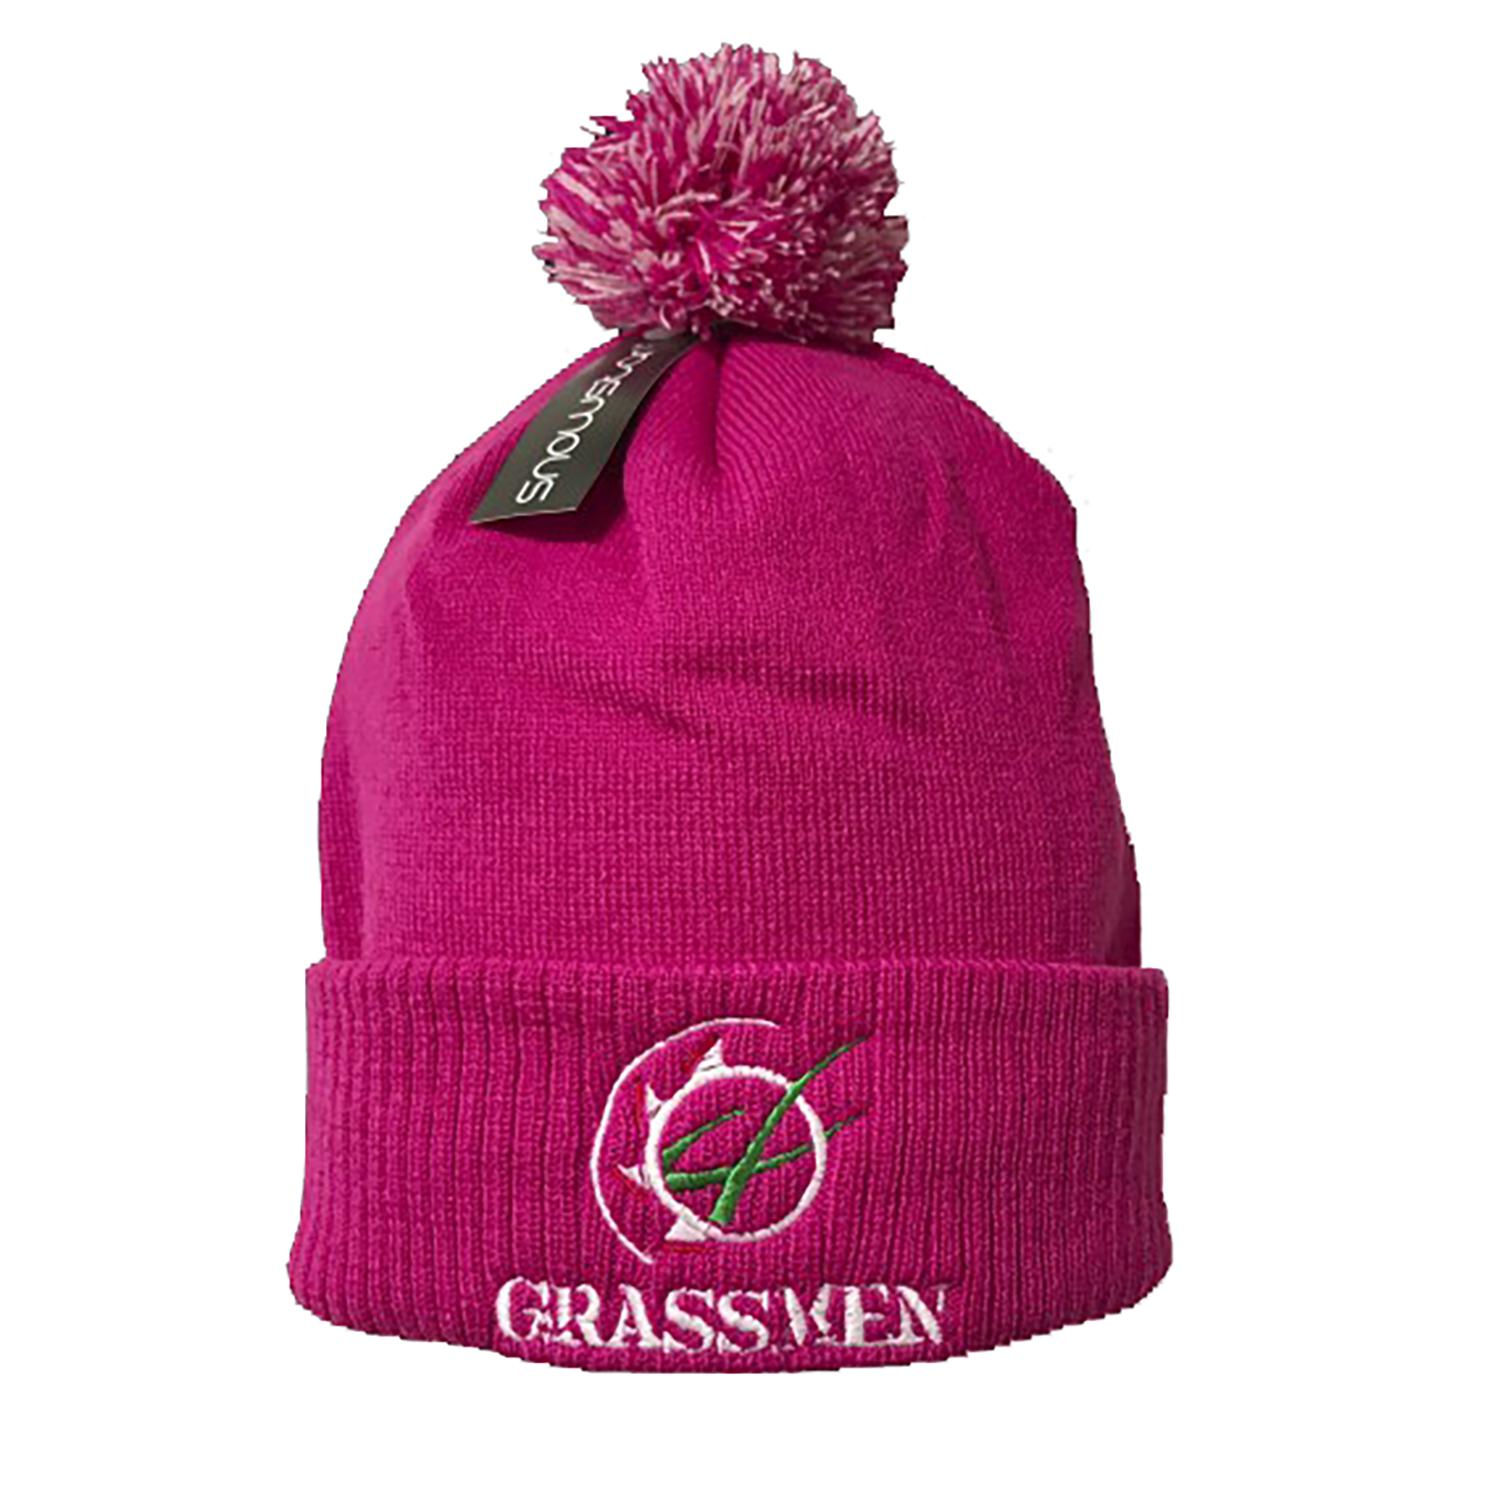 Buy Grassmen Pink Bobble Hat from Fane Valley Stores Agricultural Supplies